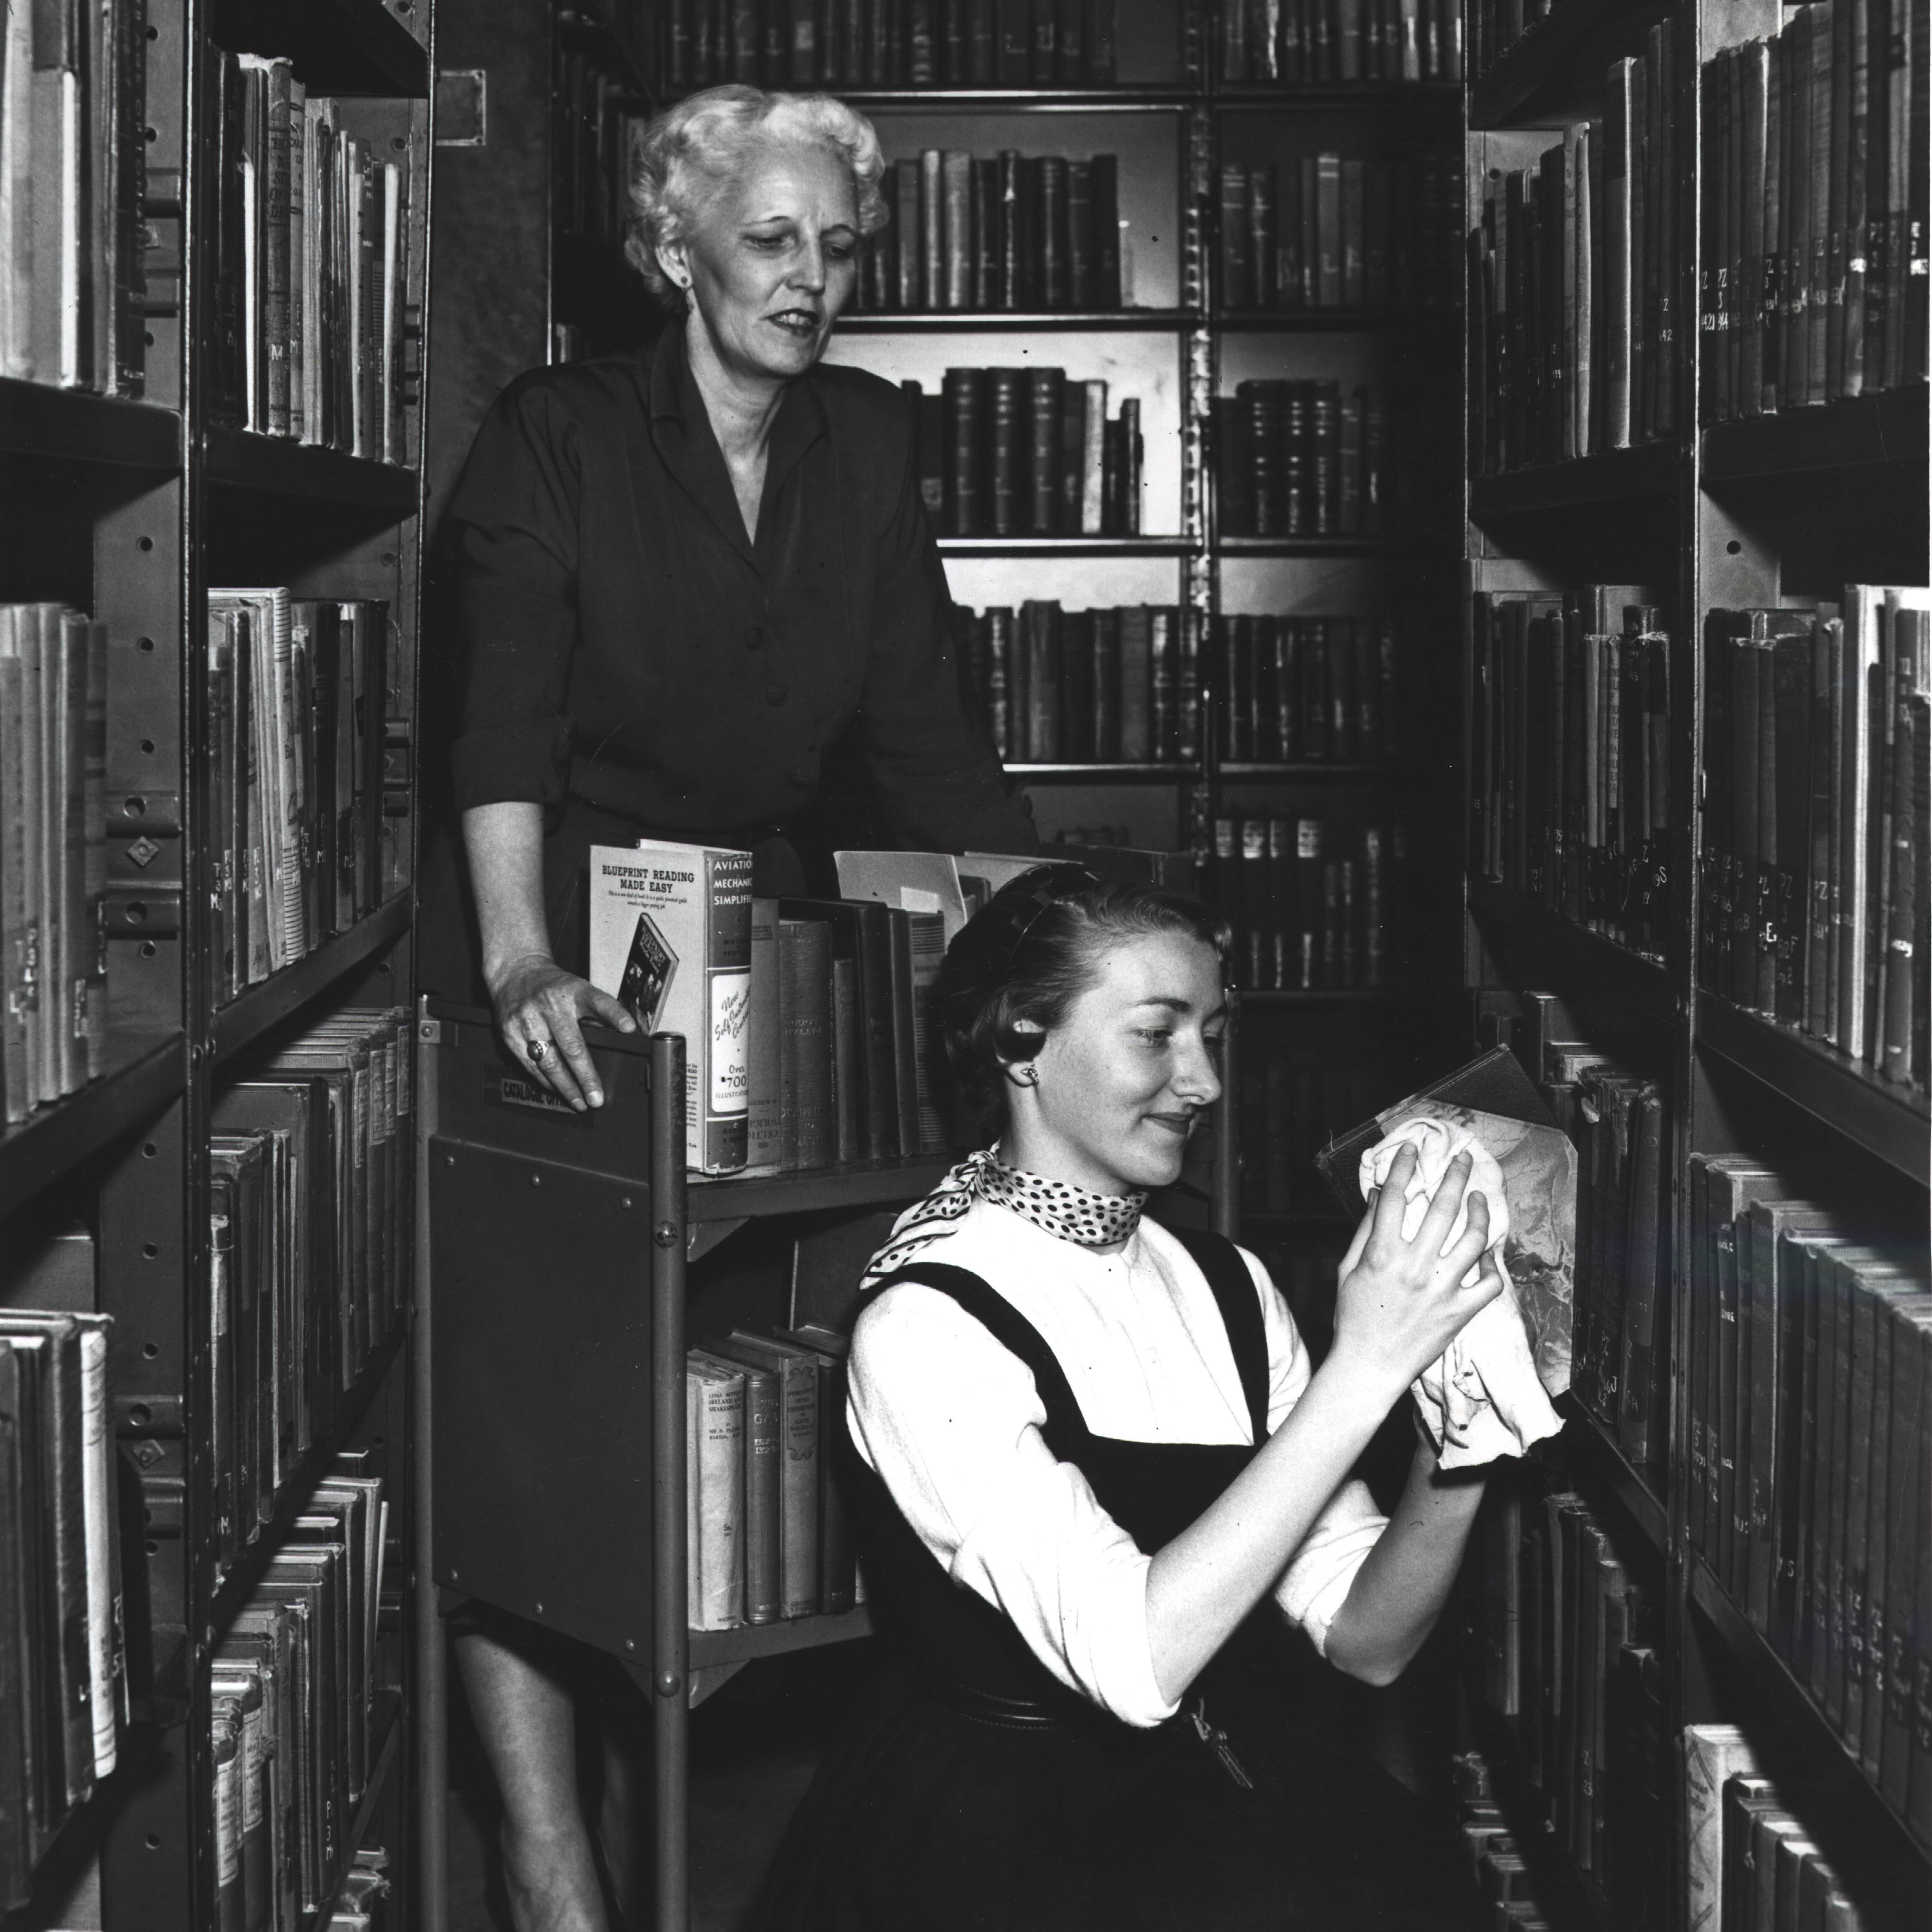 Archival photo of library staff putting away books